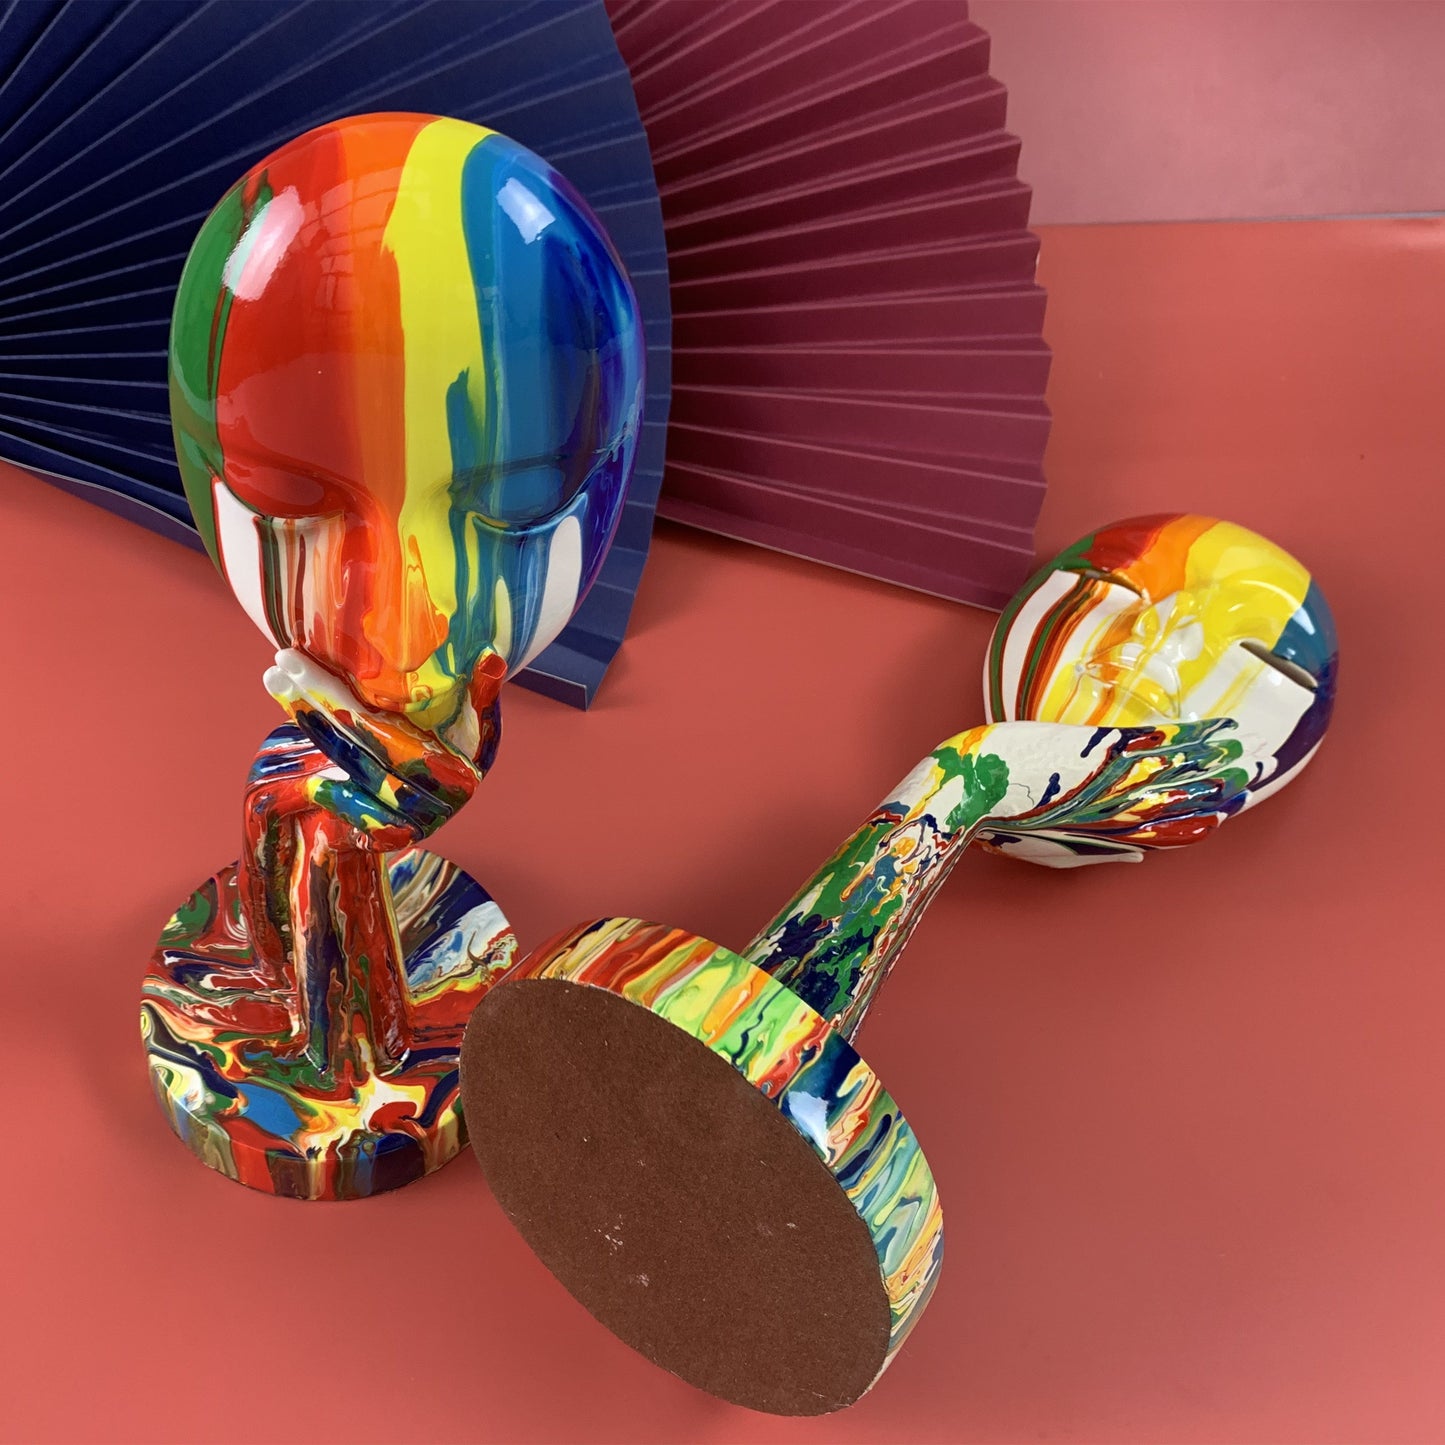 Painted Colorful Thinking Face Statue